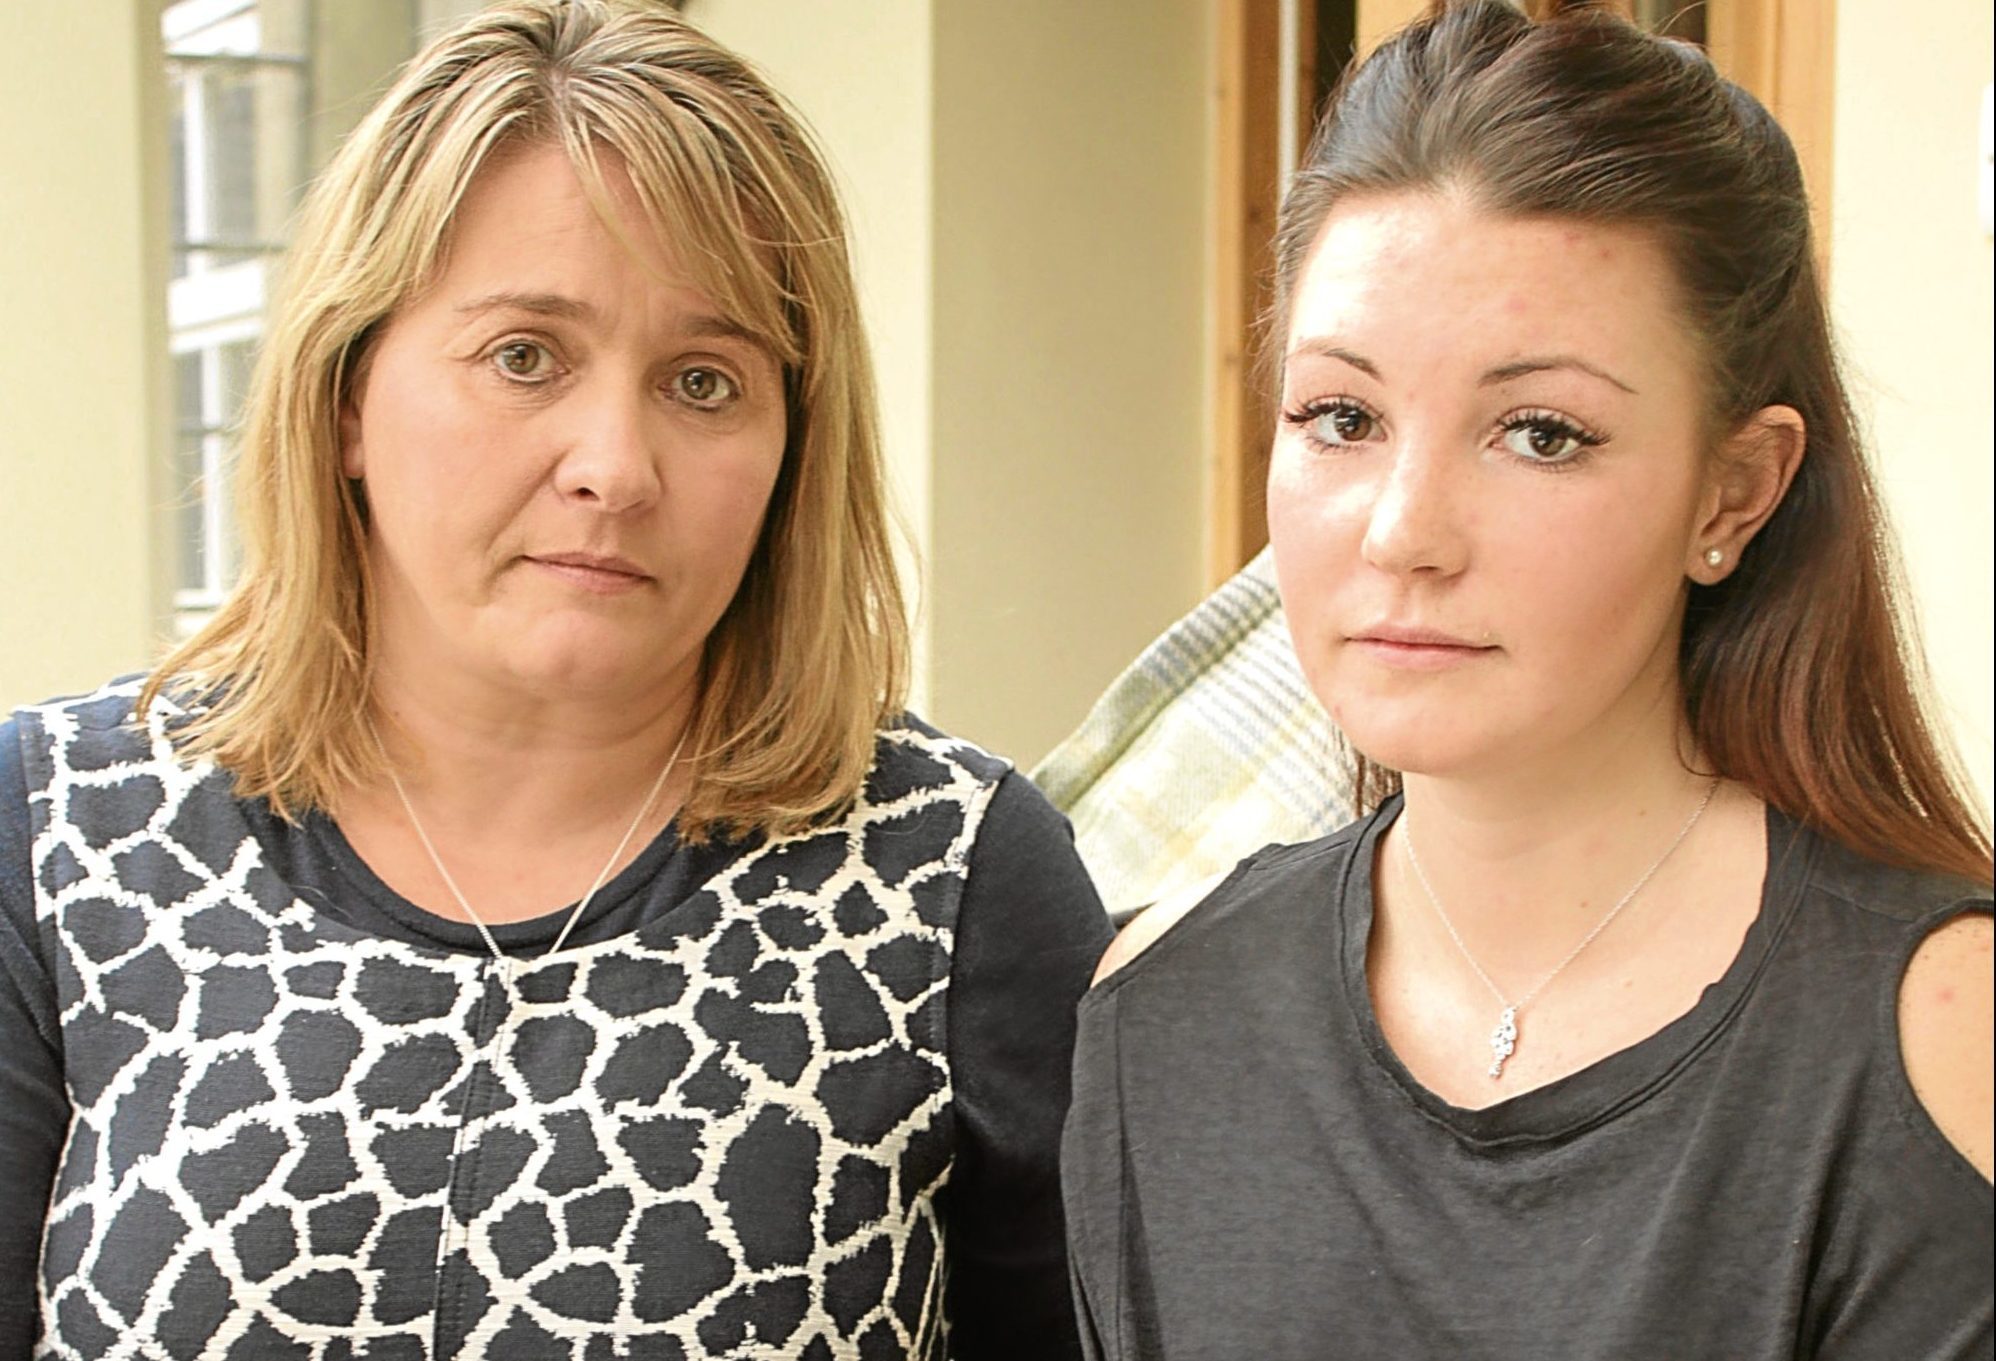 Nicola Urquhart (left), mother of missing 23-year-old Corrie McKeague, and April Oliver, 21, girlfriend of the RAF serviceman, who has revealed she is expecting his child. (April Oliver/BBC Look East/PA Wire)